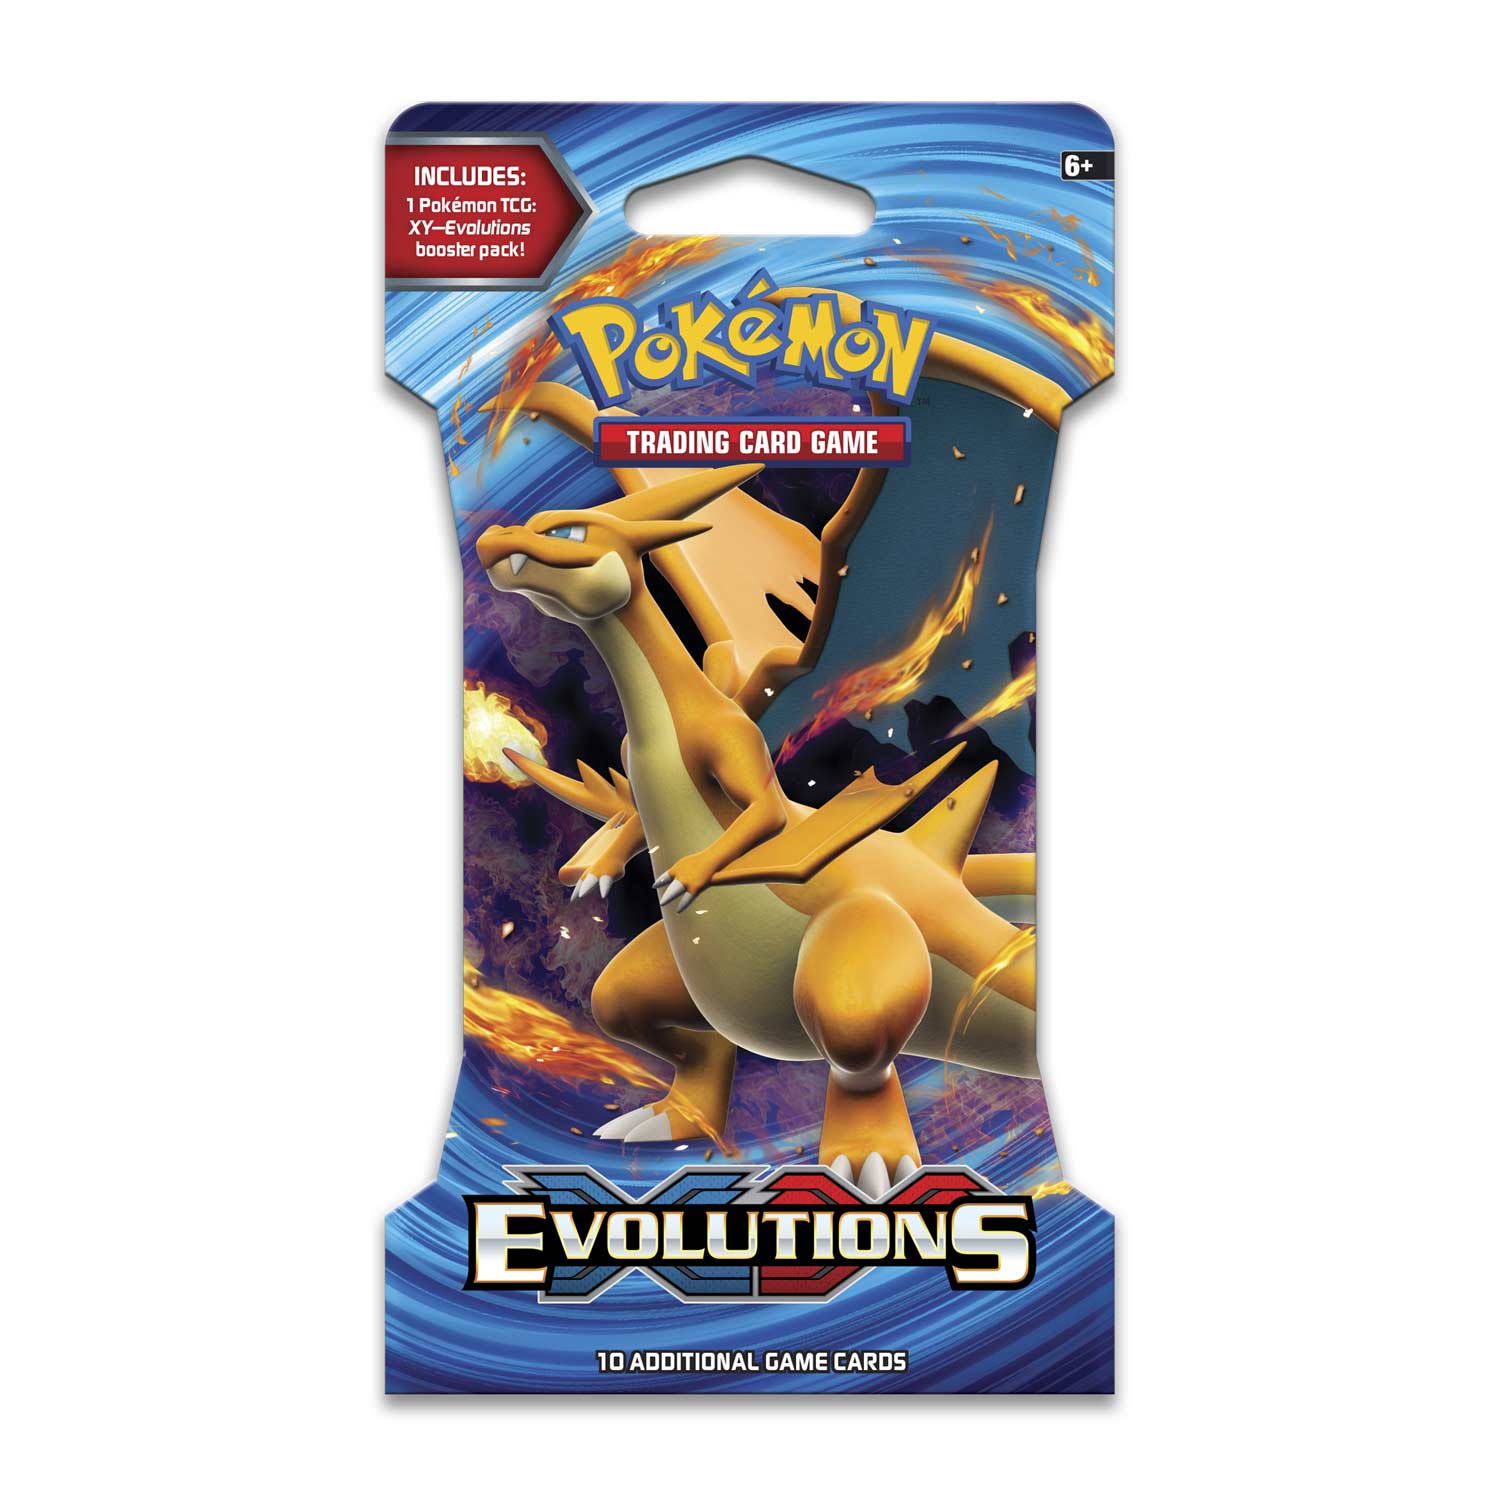 Pokémon Tcg Xyevolutions Sleeved Booster Pack 10 Cards